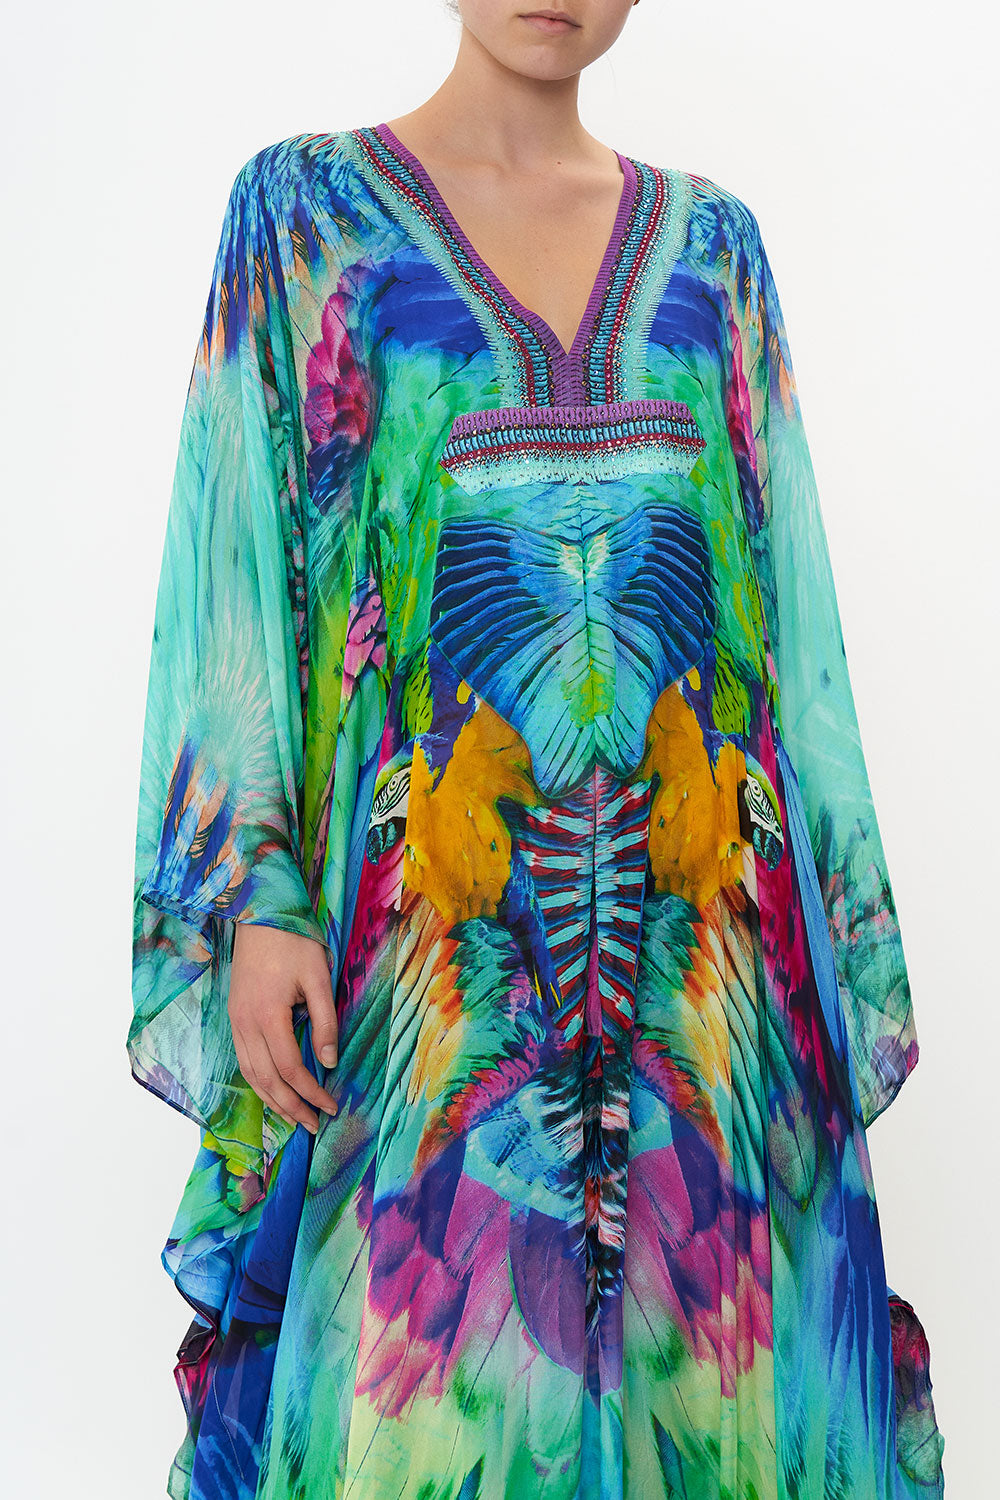 BELTED KAFTAN WITH ARM DETAIL AGE OF ASTERIA